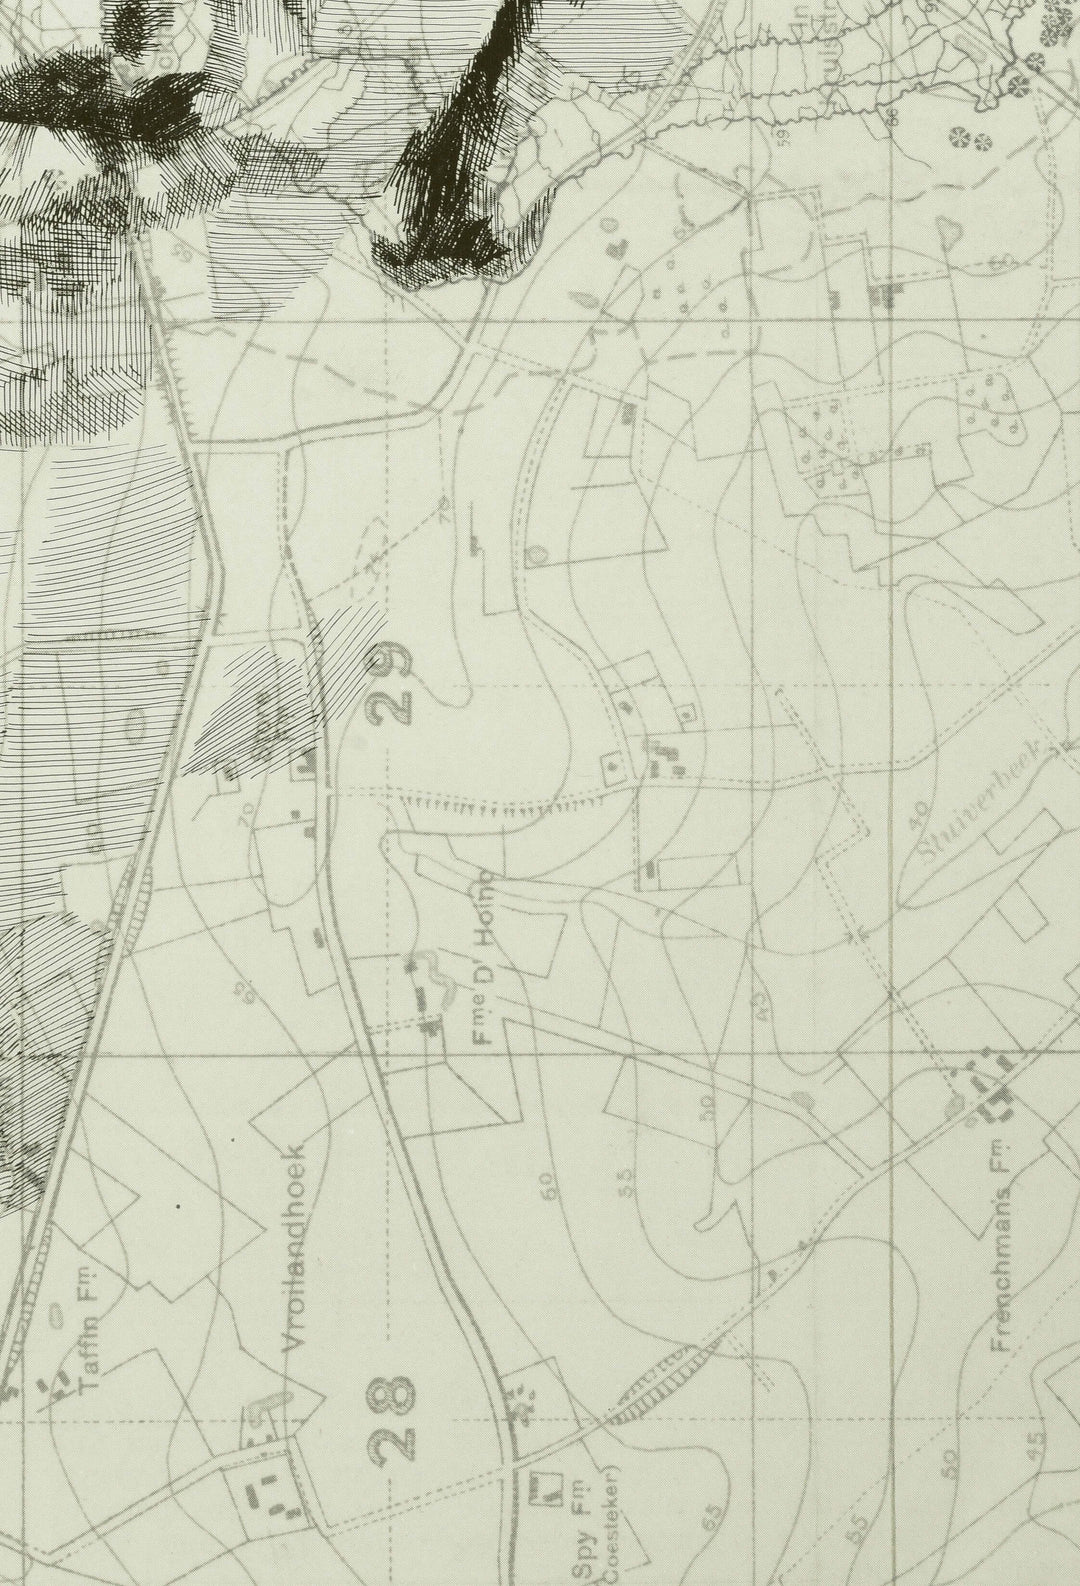 An Ed Fairburn | "Western Front" map of the area.